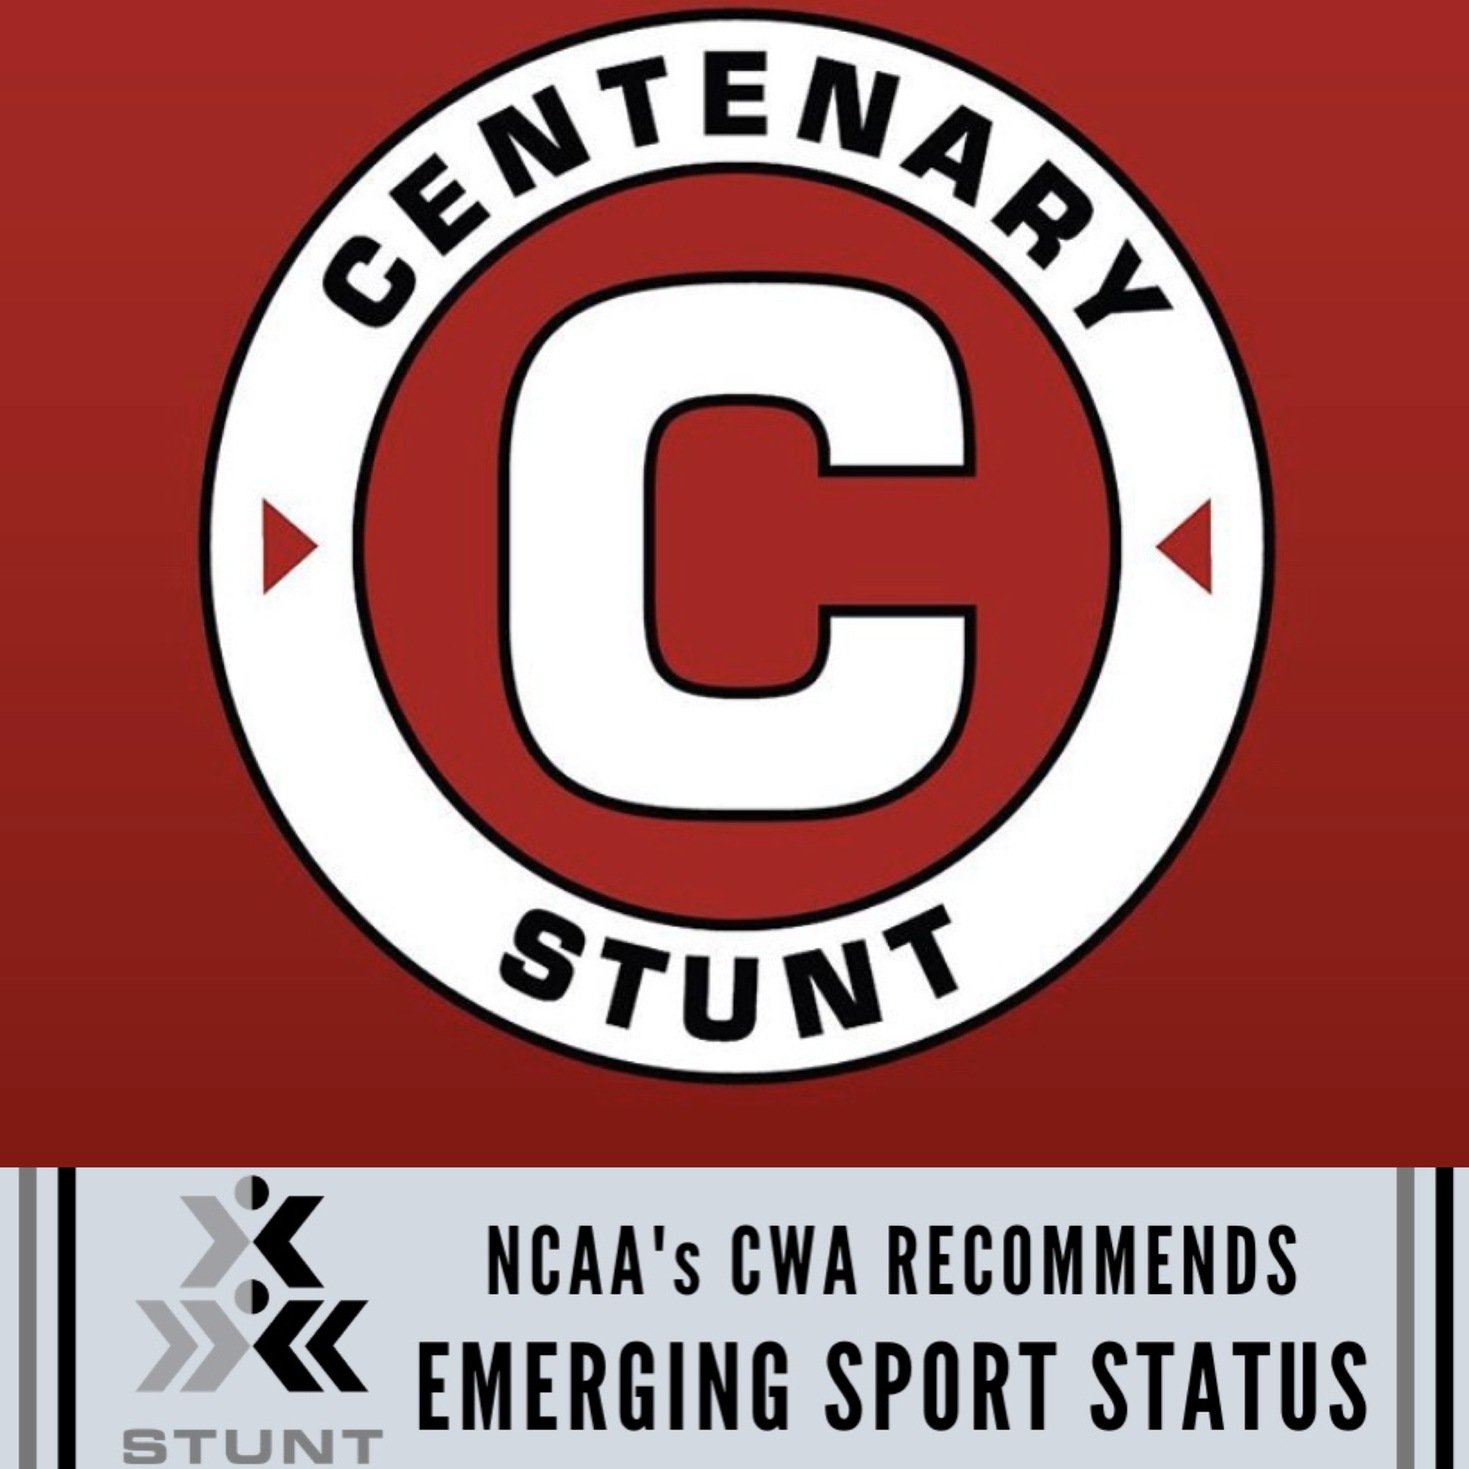 STUNT Receives Emerging Sport Recommendation from the NCAA’s Committee on Women’s Athletics